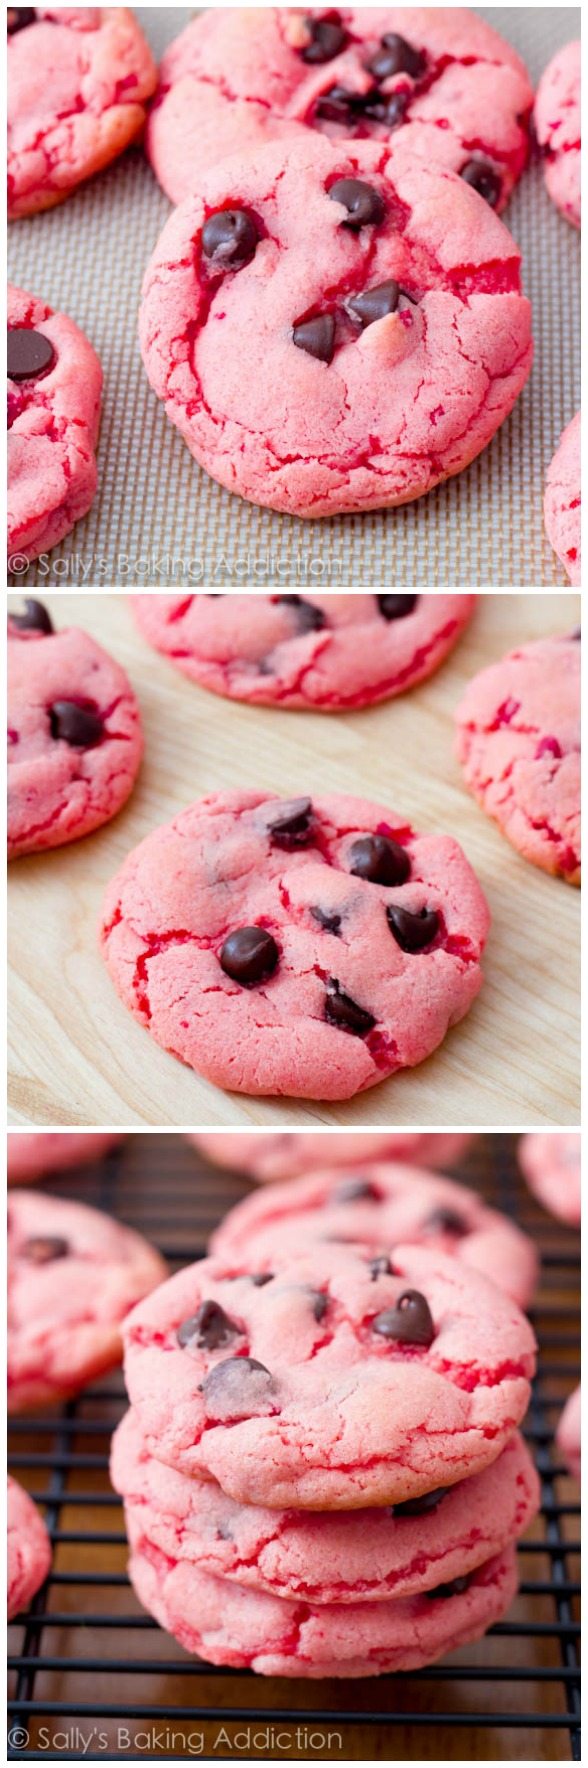 3 images of strawberry cookies with chocolate chips